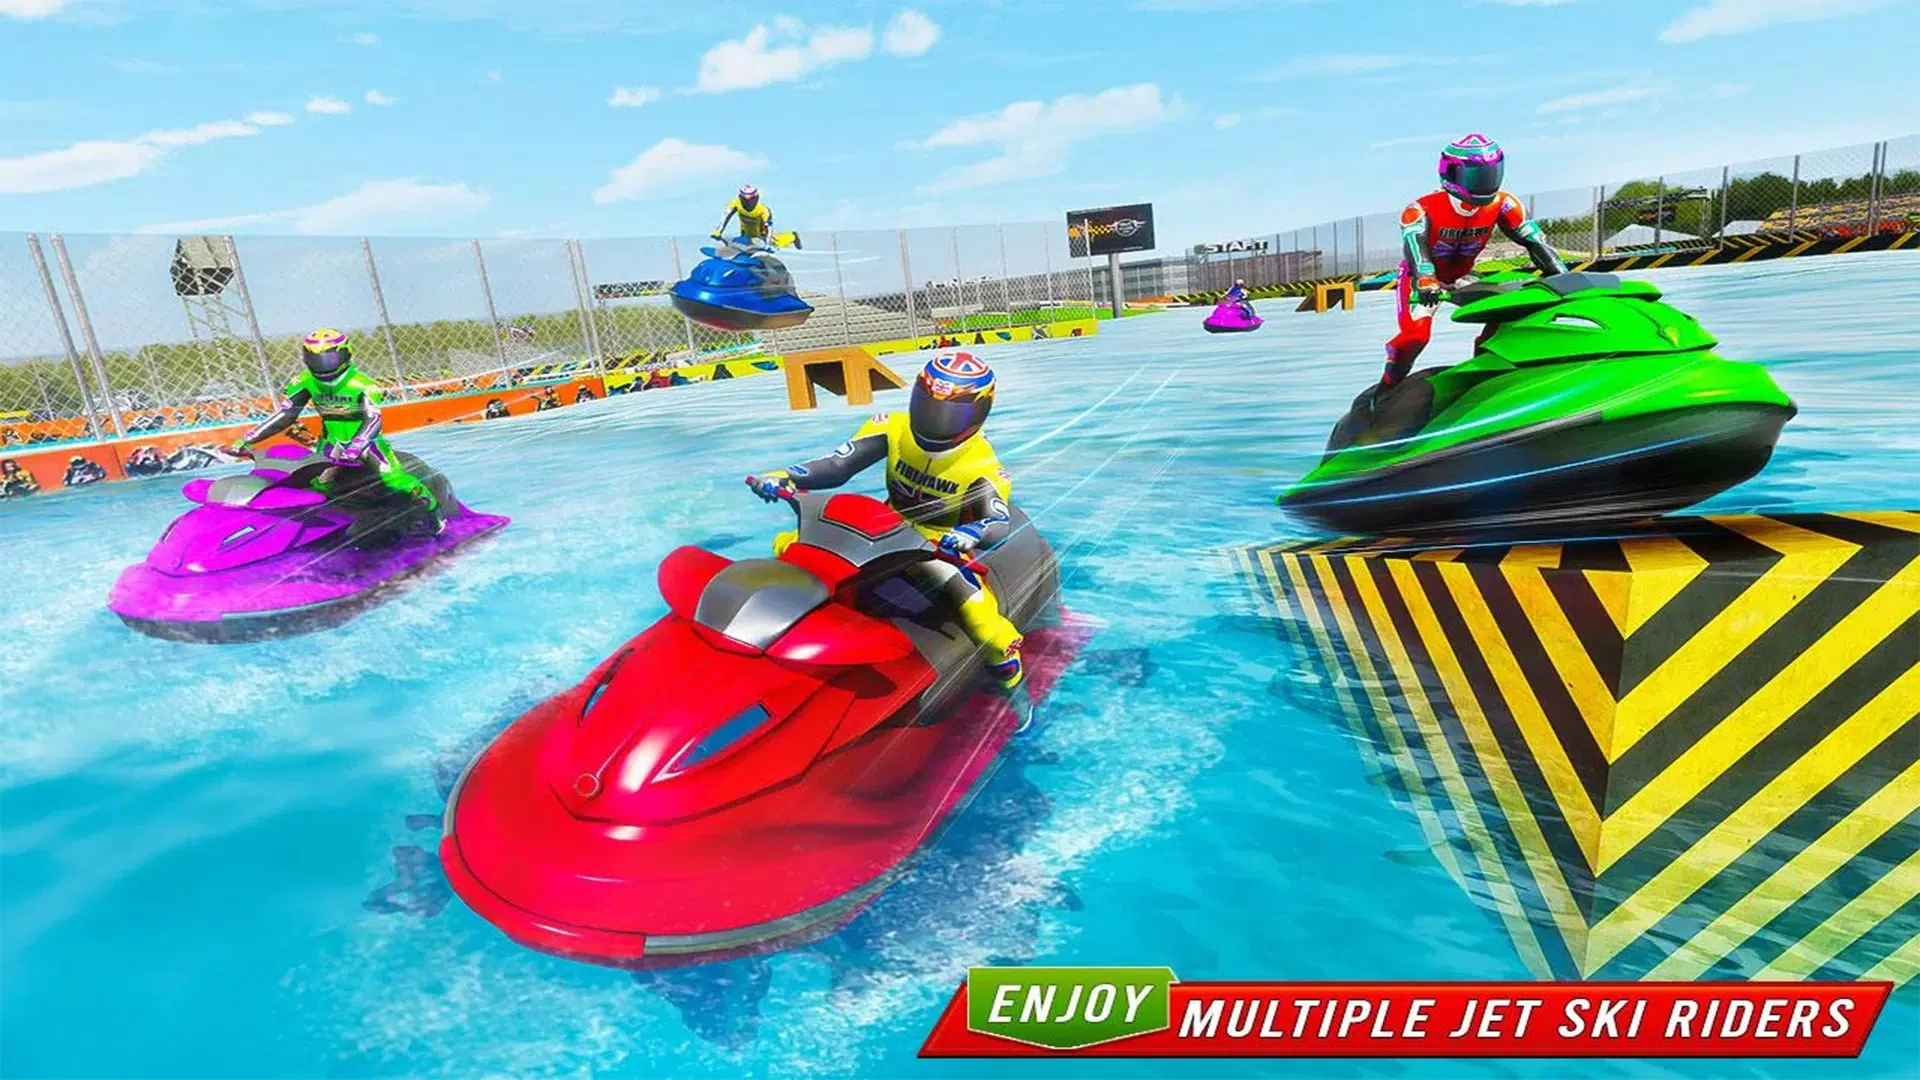 Doodle Speed Boat Stunt Race - Free Jet Ski Racing Game by 12